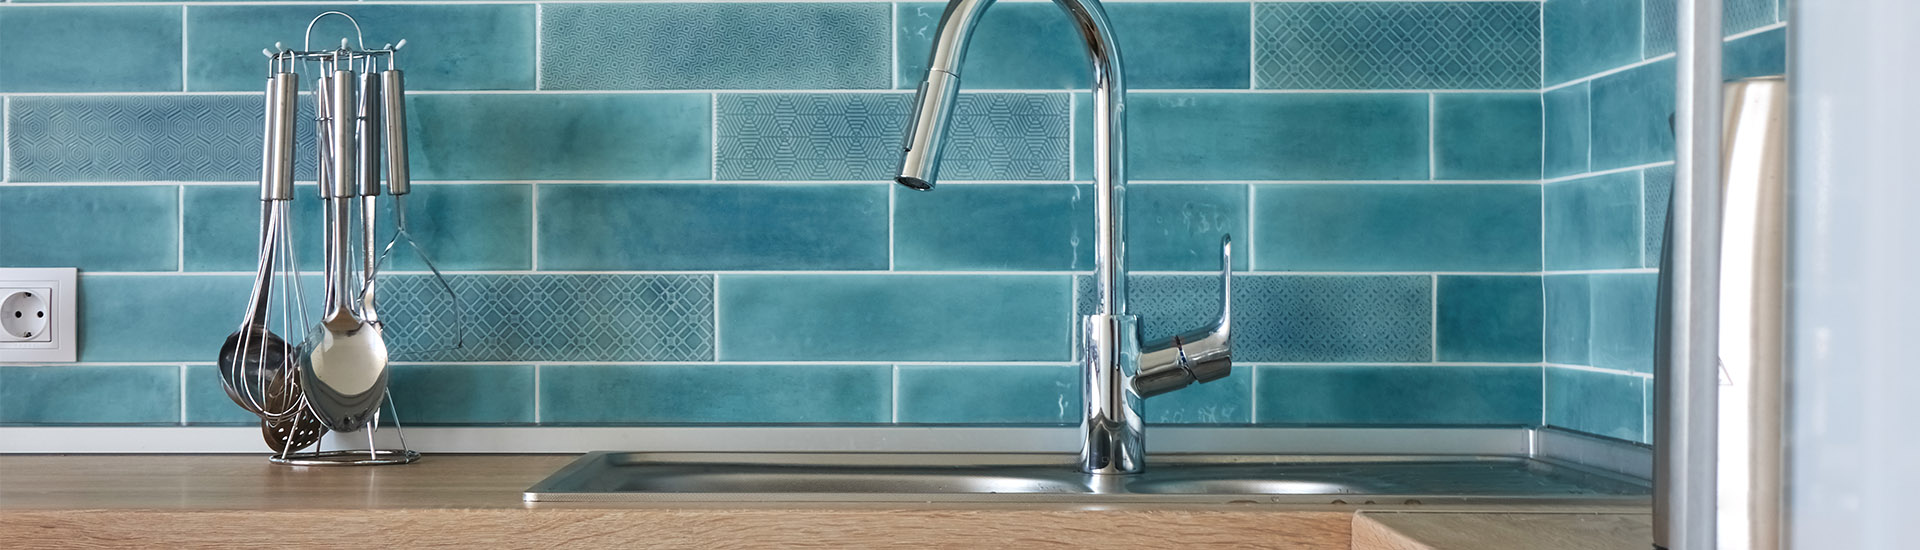 4 Things to Consider When Choosing the Right Backsplash Designs